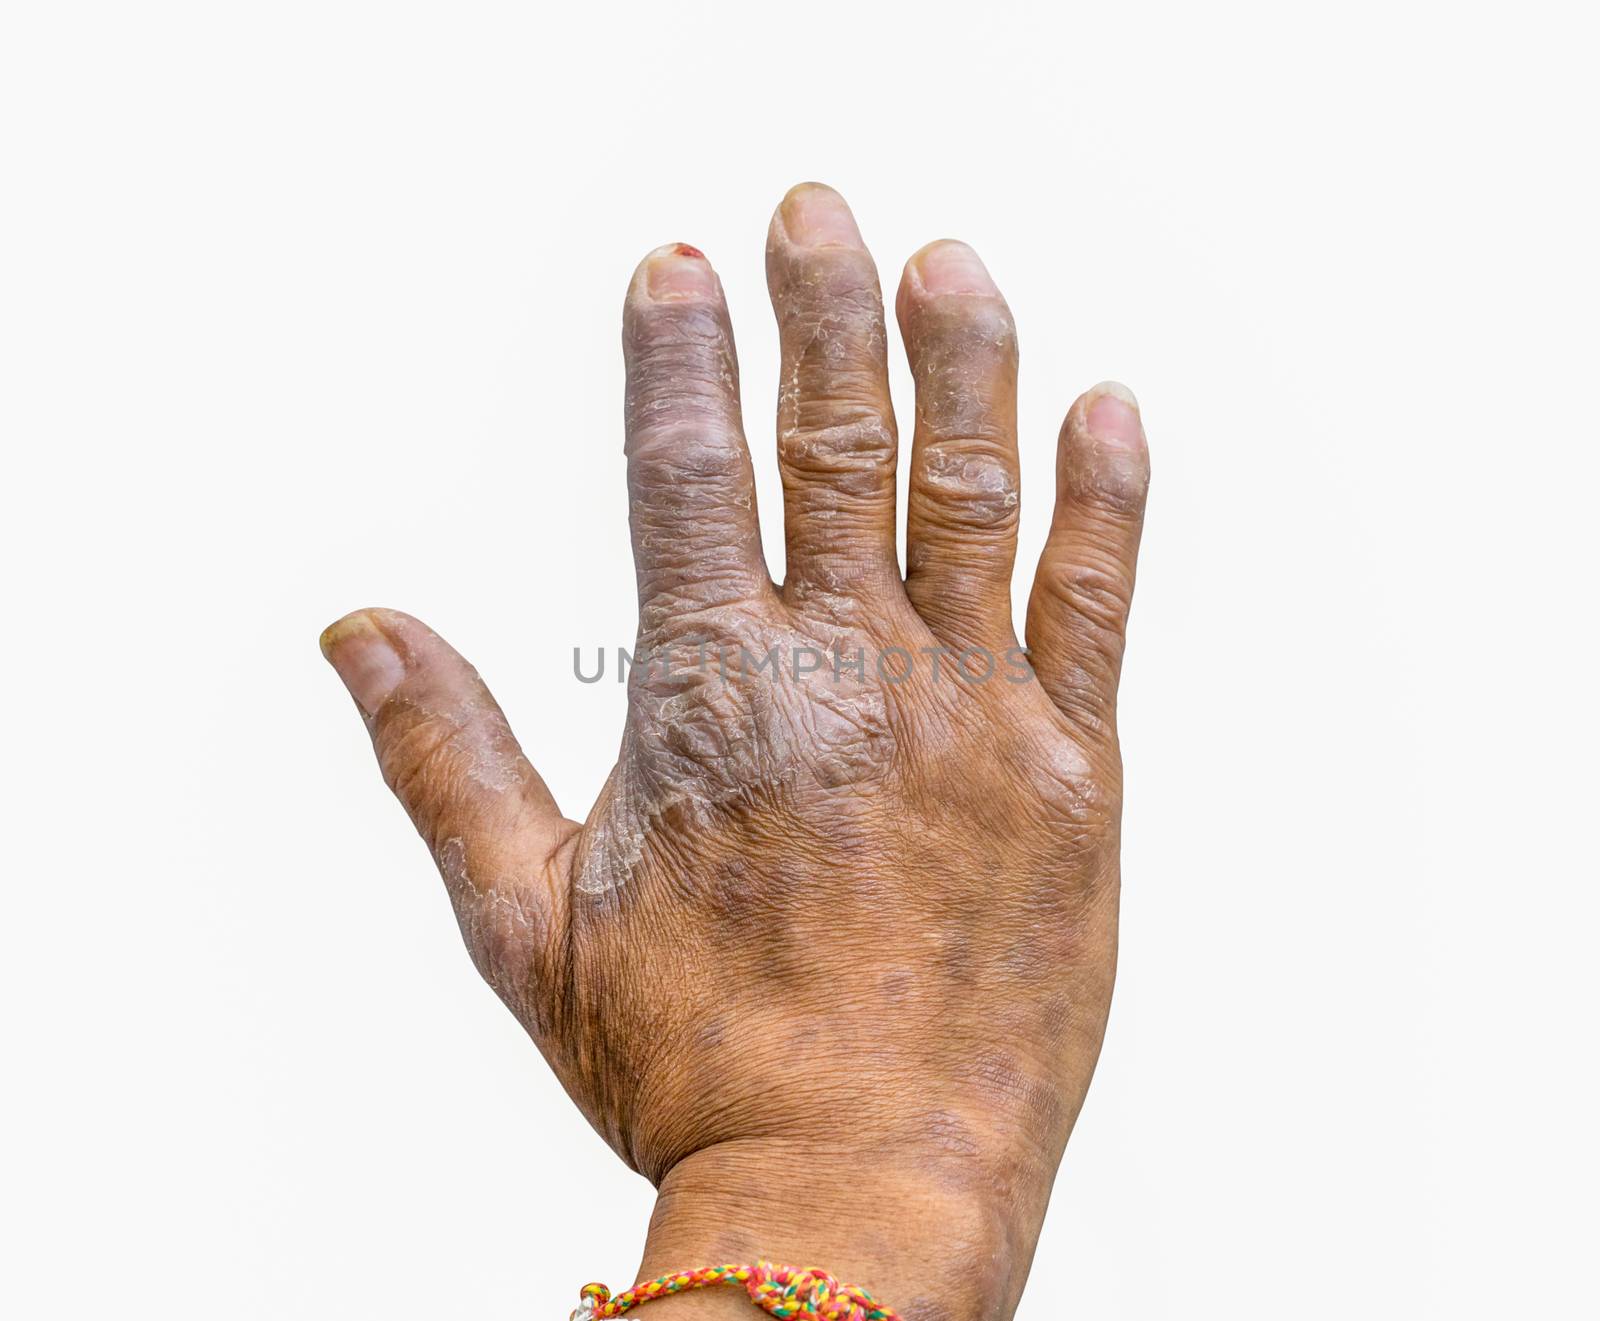 Closeup of psoriasis on the hands of farmers isolated on white background, dermatology skin disease. Psoriasis fingers deformity.